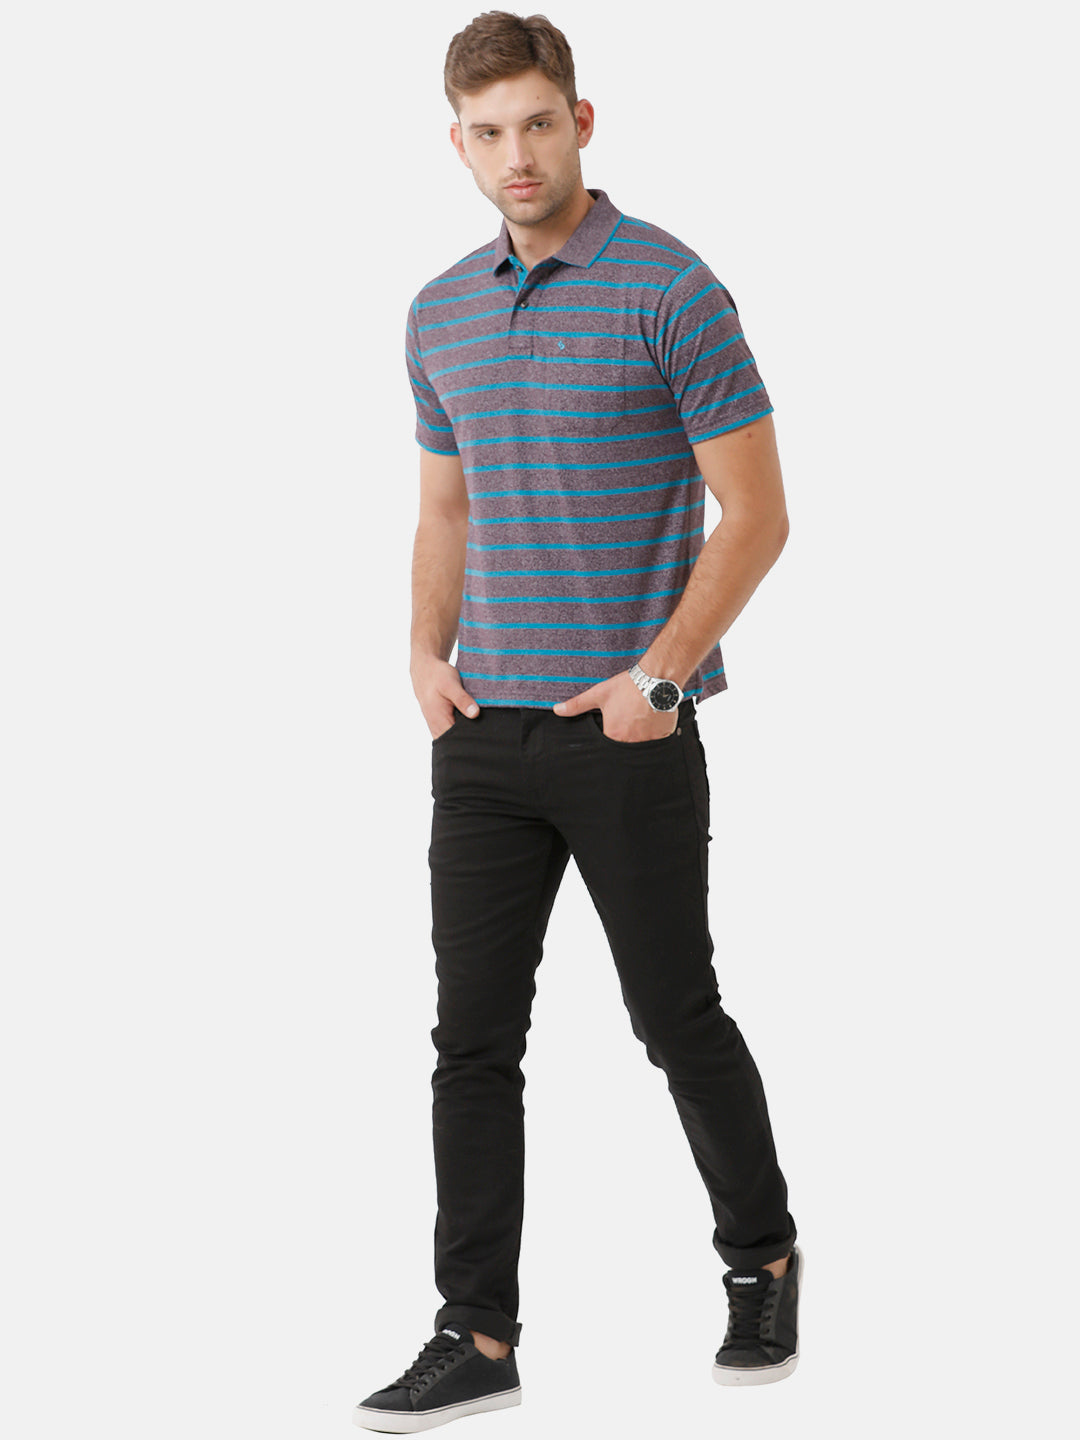 Classic Polo Mens Cotton Blend Striped Half Sleeve Authentic Fit Polo Neck Dark Grey Color T-Shirt | Mel 212 B